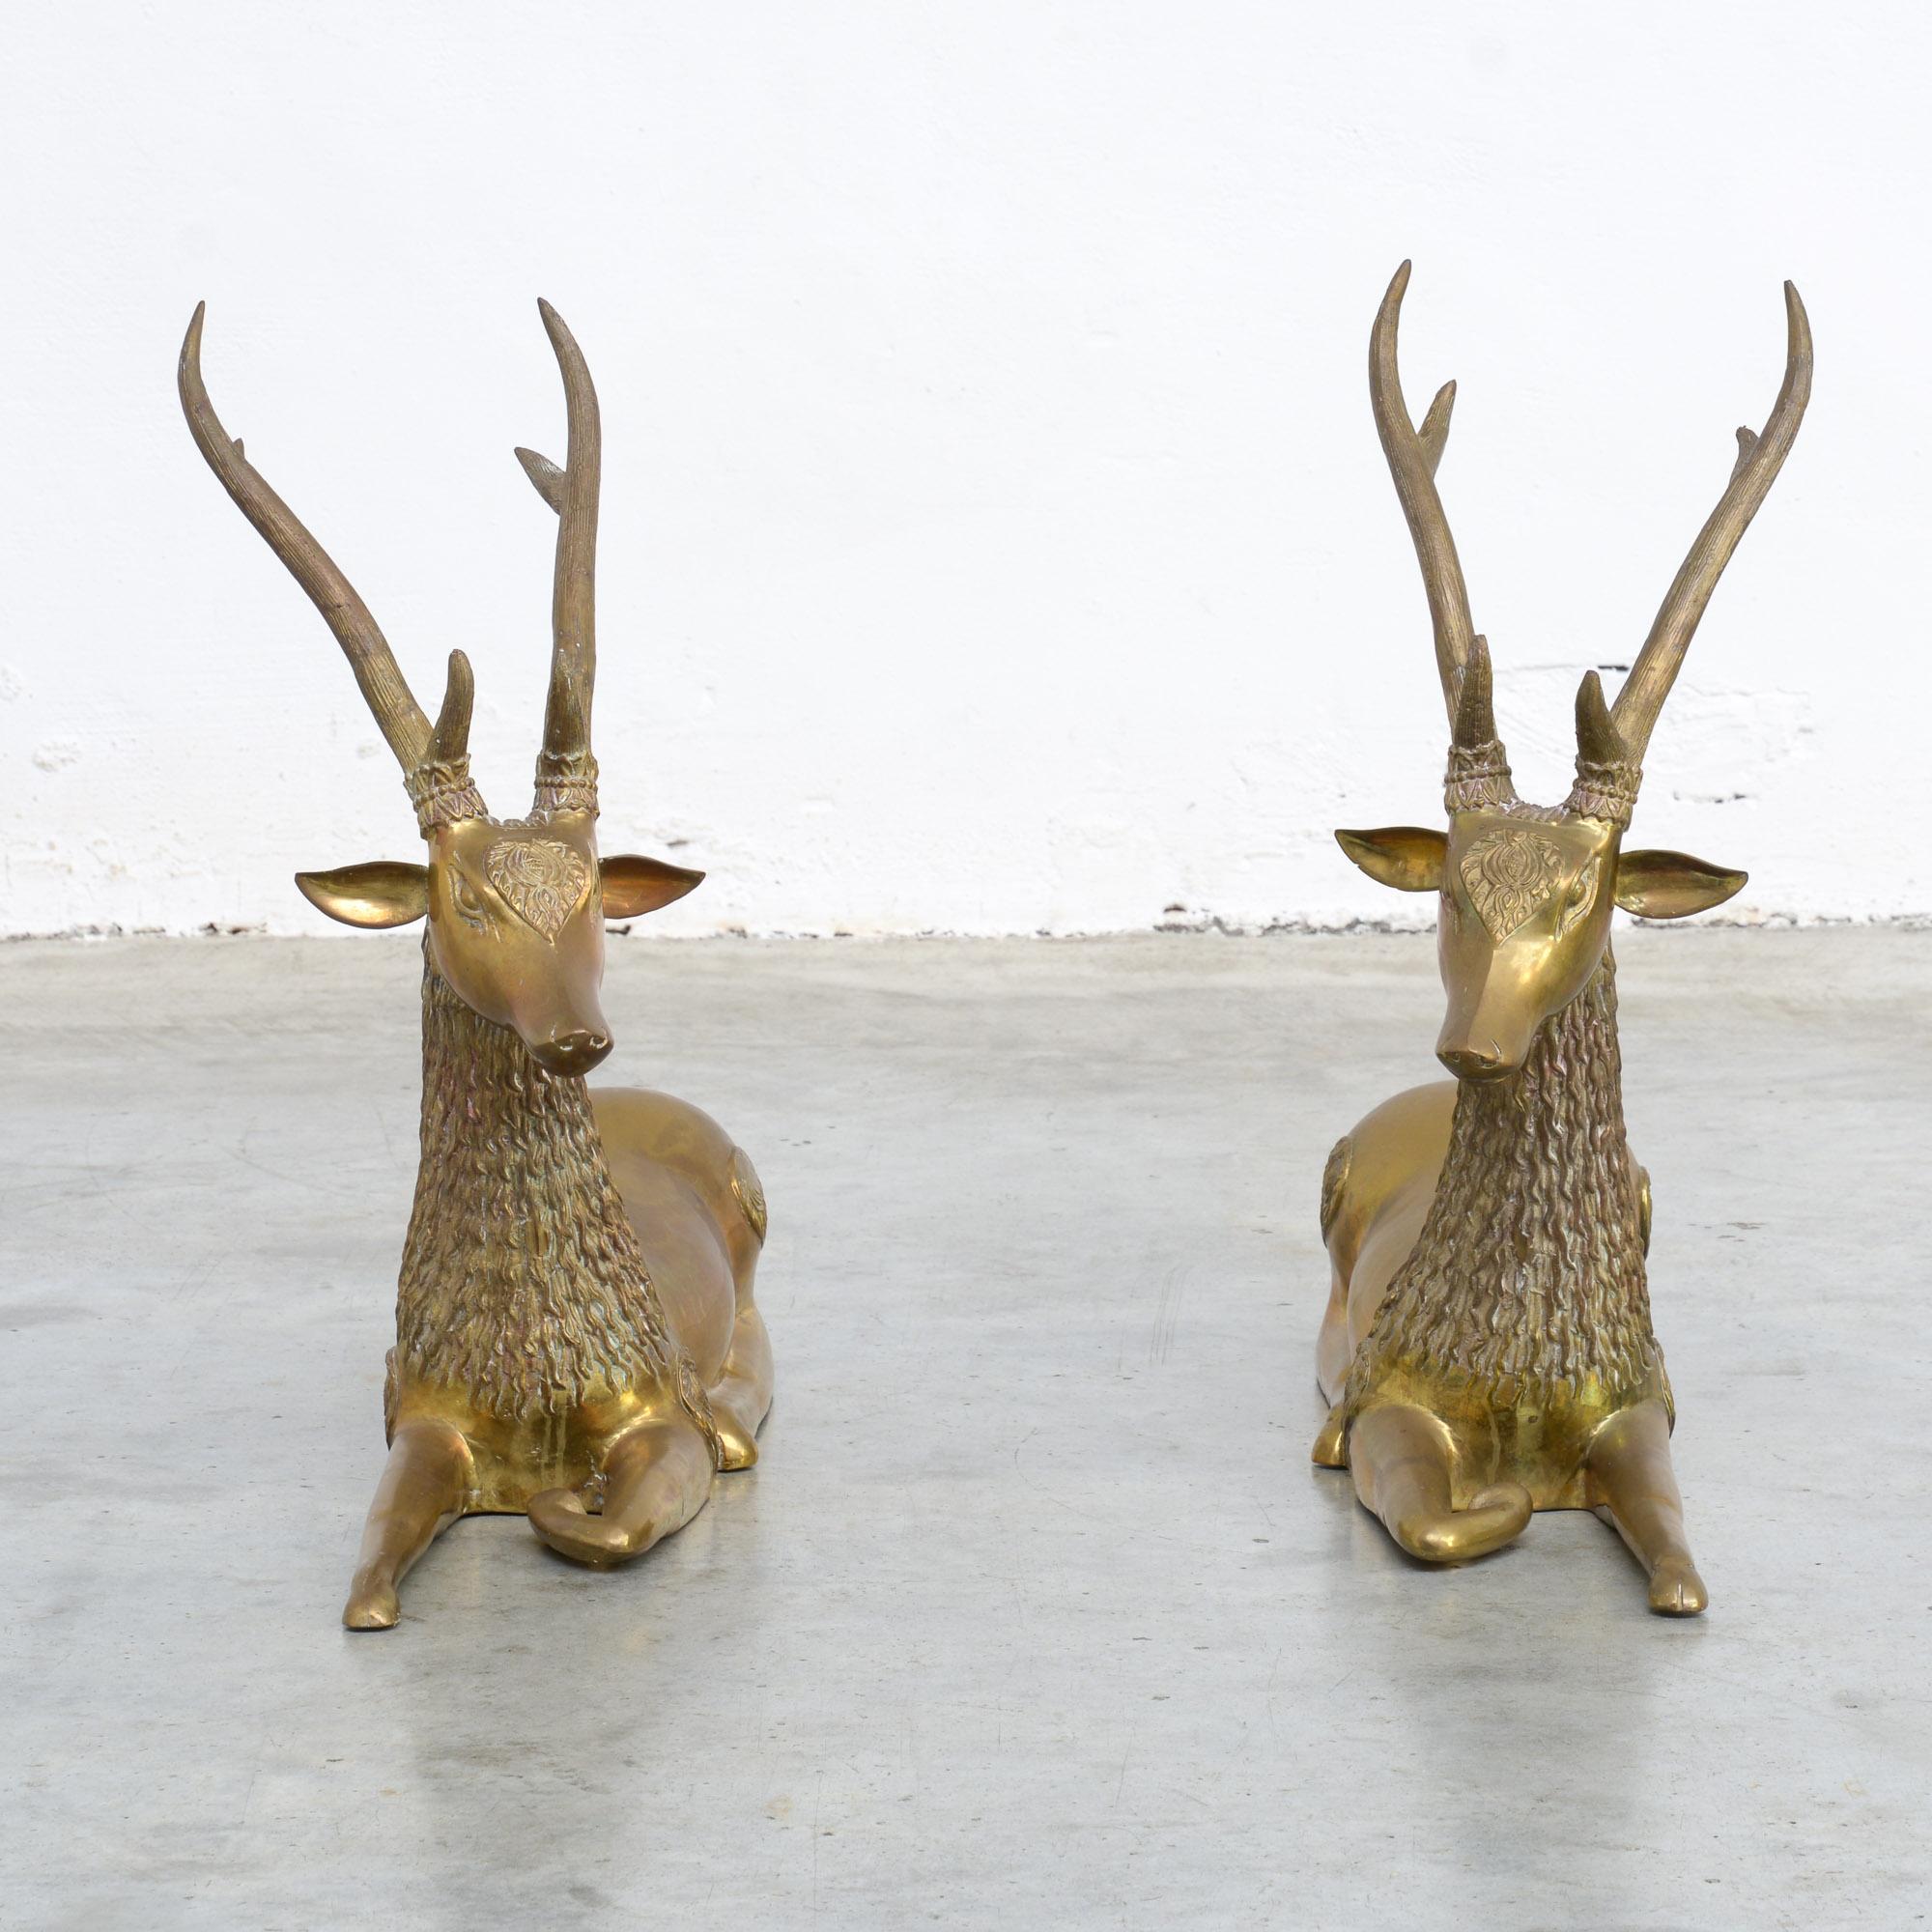 This pair of brass deer sculptures can be dated in the 1970s.
These decorative sculptures are in very good condition.
The price is for the pair.